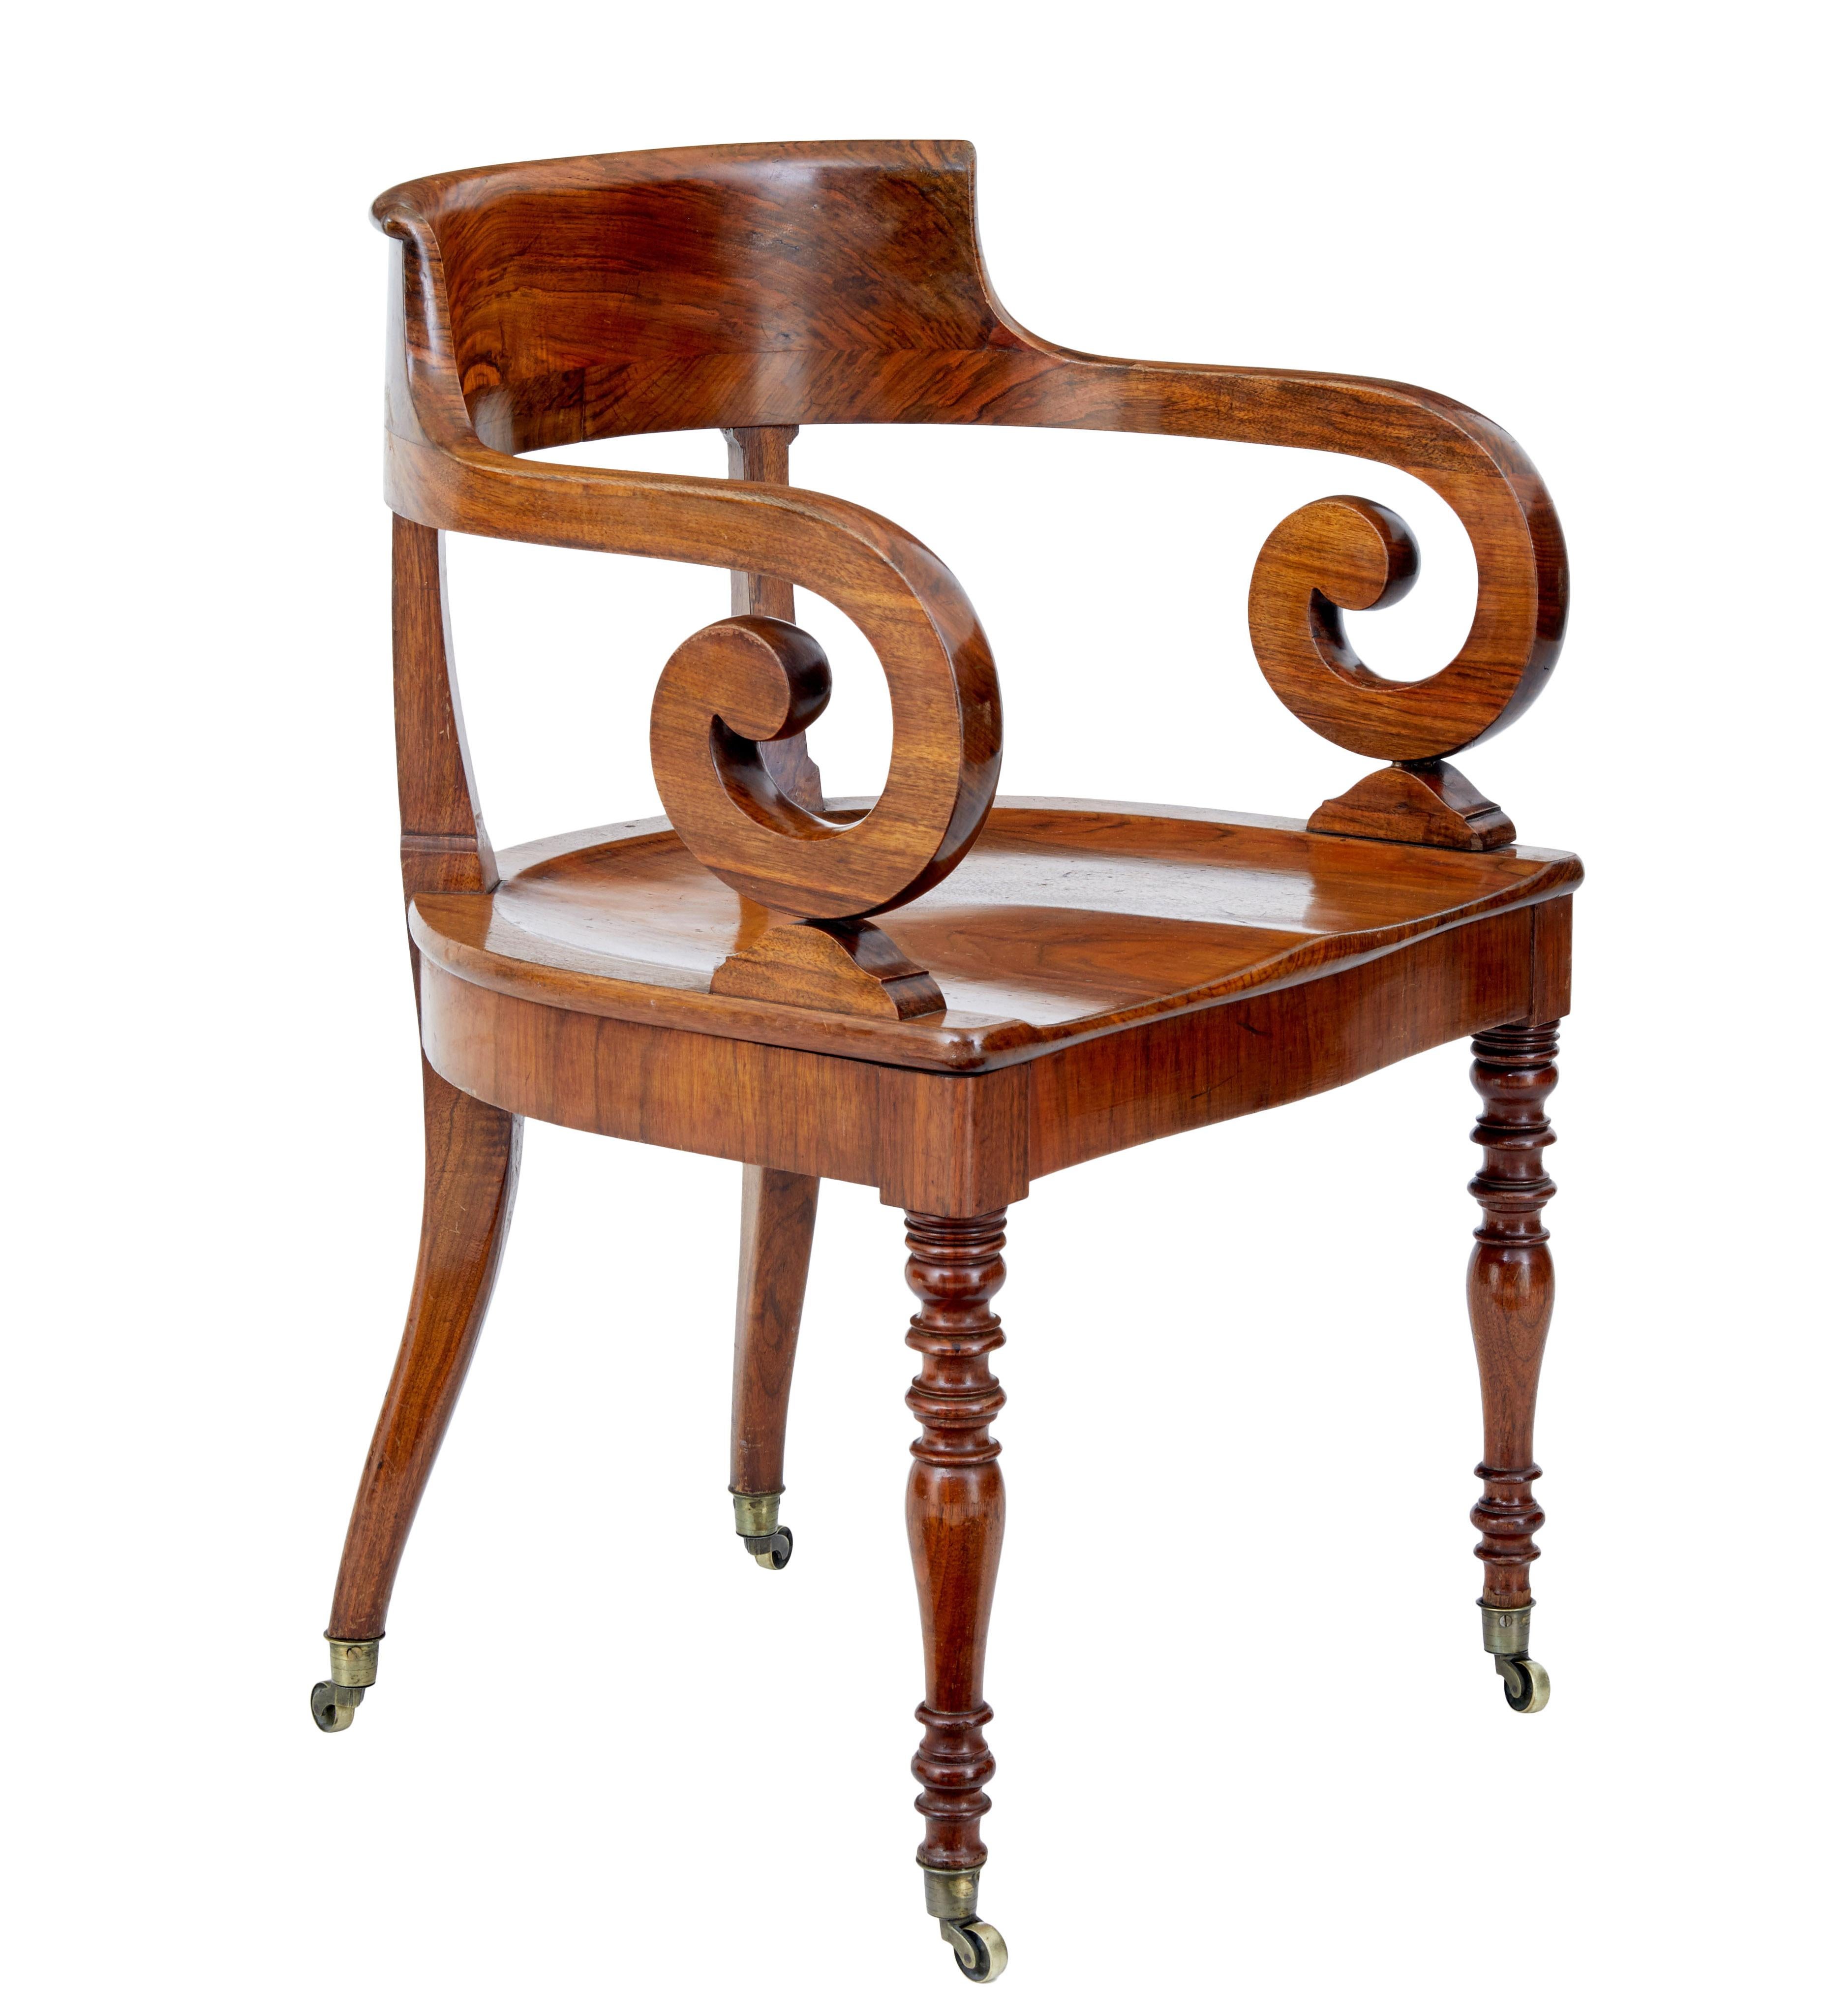 Fine quality and rare set of 6 Danish captains chairs, circa 1860.

Beautifully made from solid walnut, these mid-19th century Danish made chairs are strong with regency period influence.

Rounded backs which flow to the scrolling arms, shaped